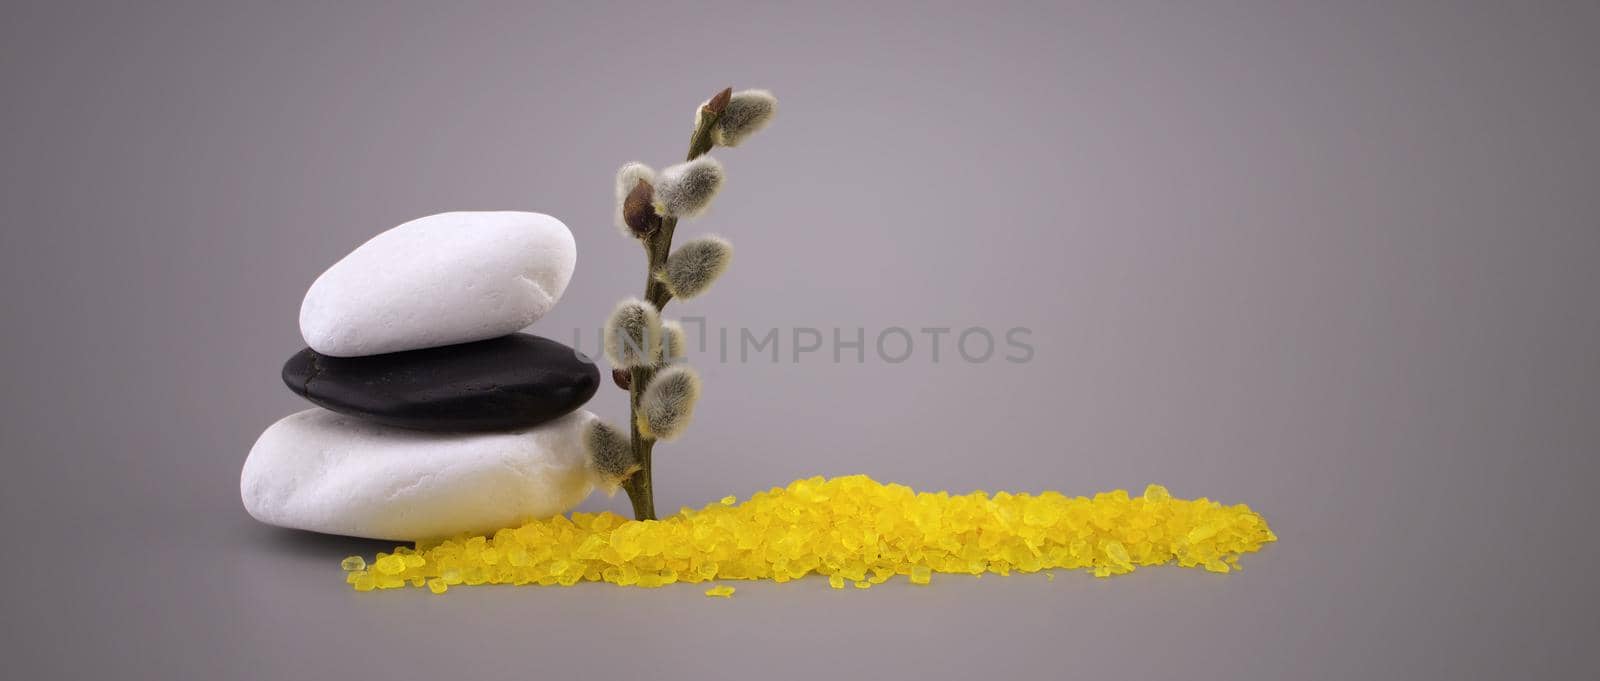 Zen still life with stacked stones, catkin and yellow crystals by NetPix